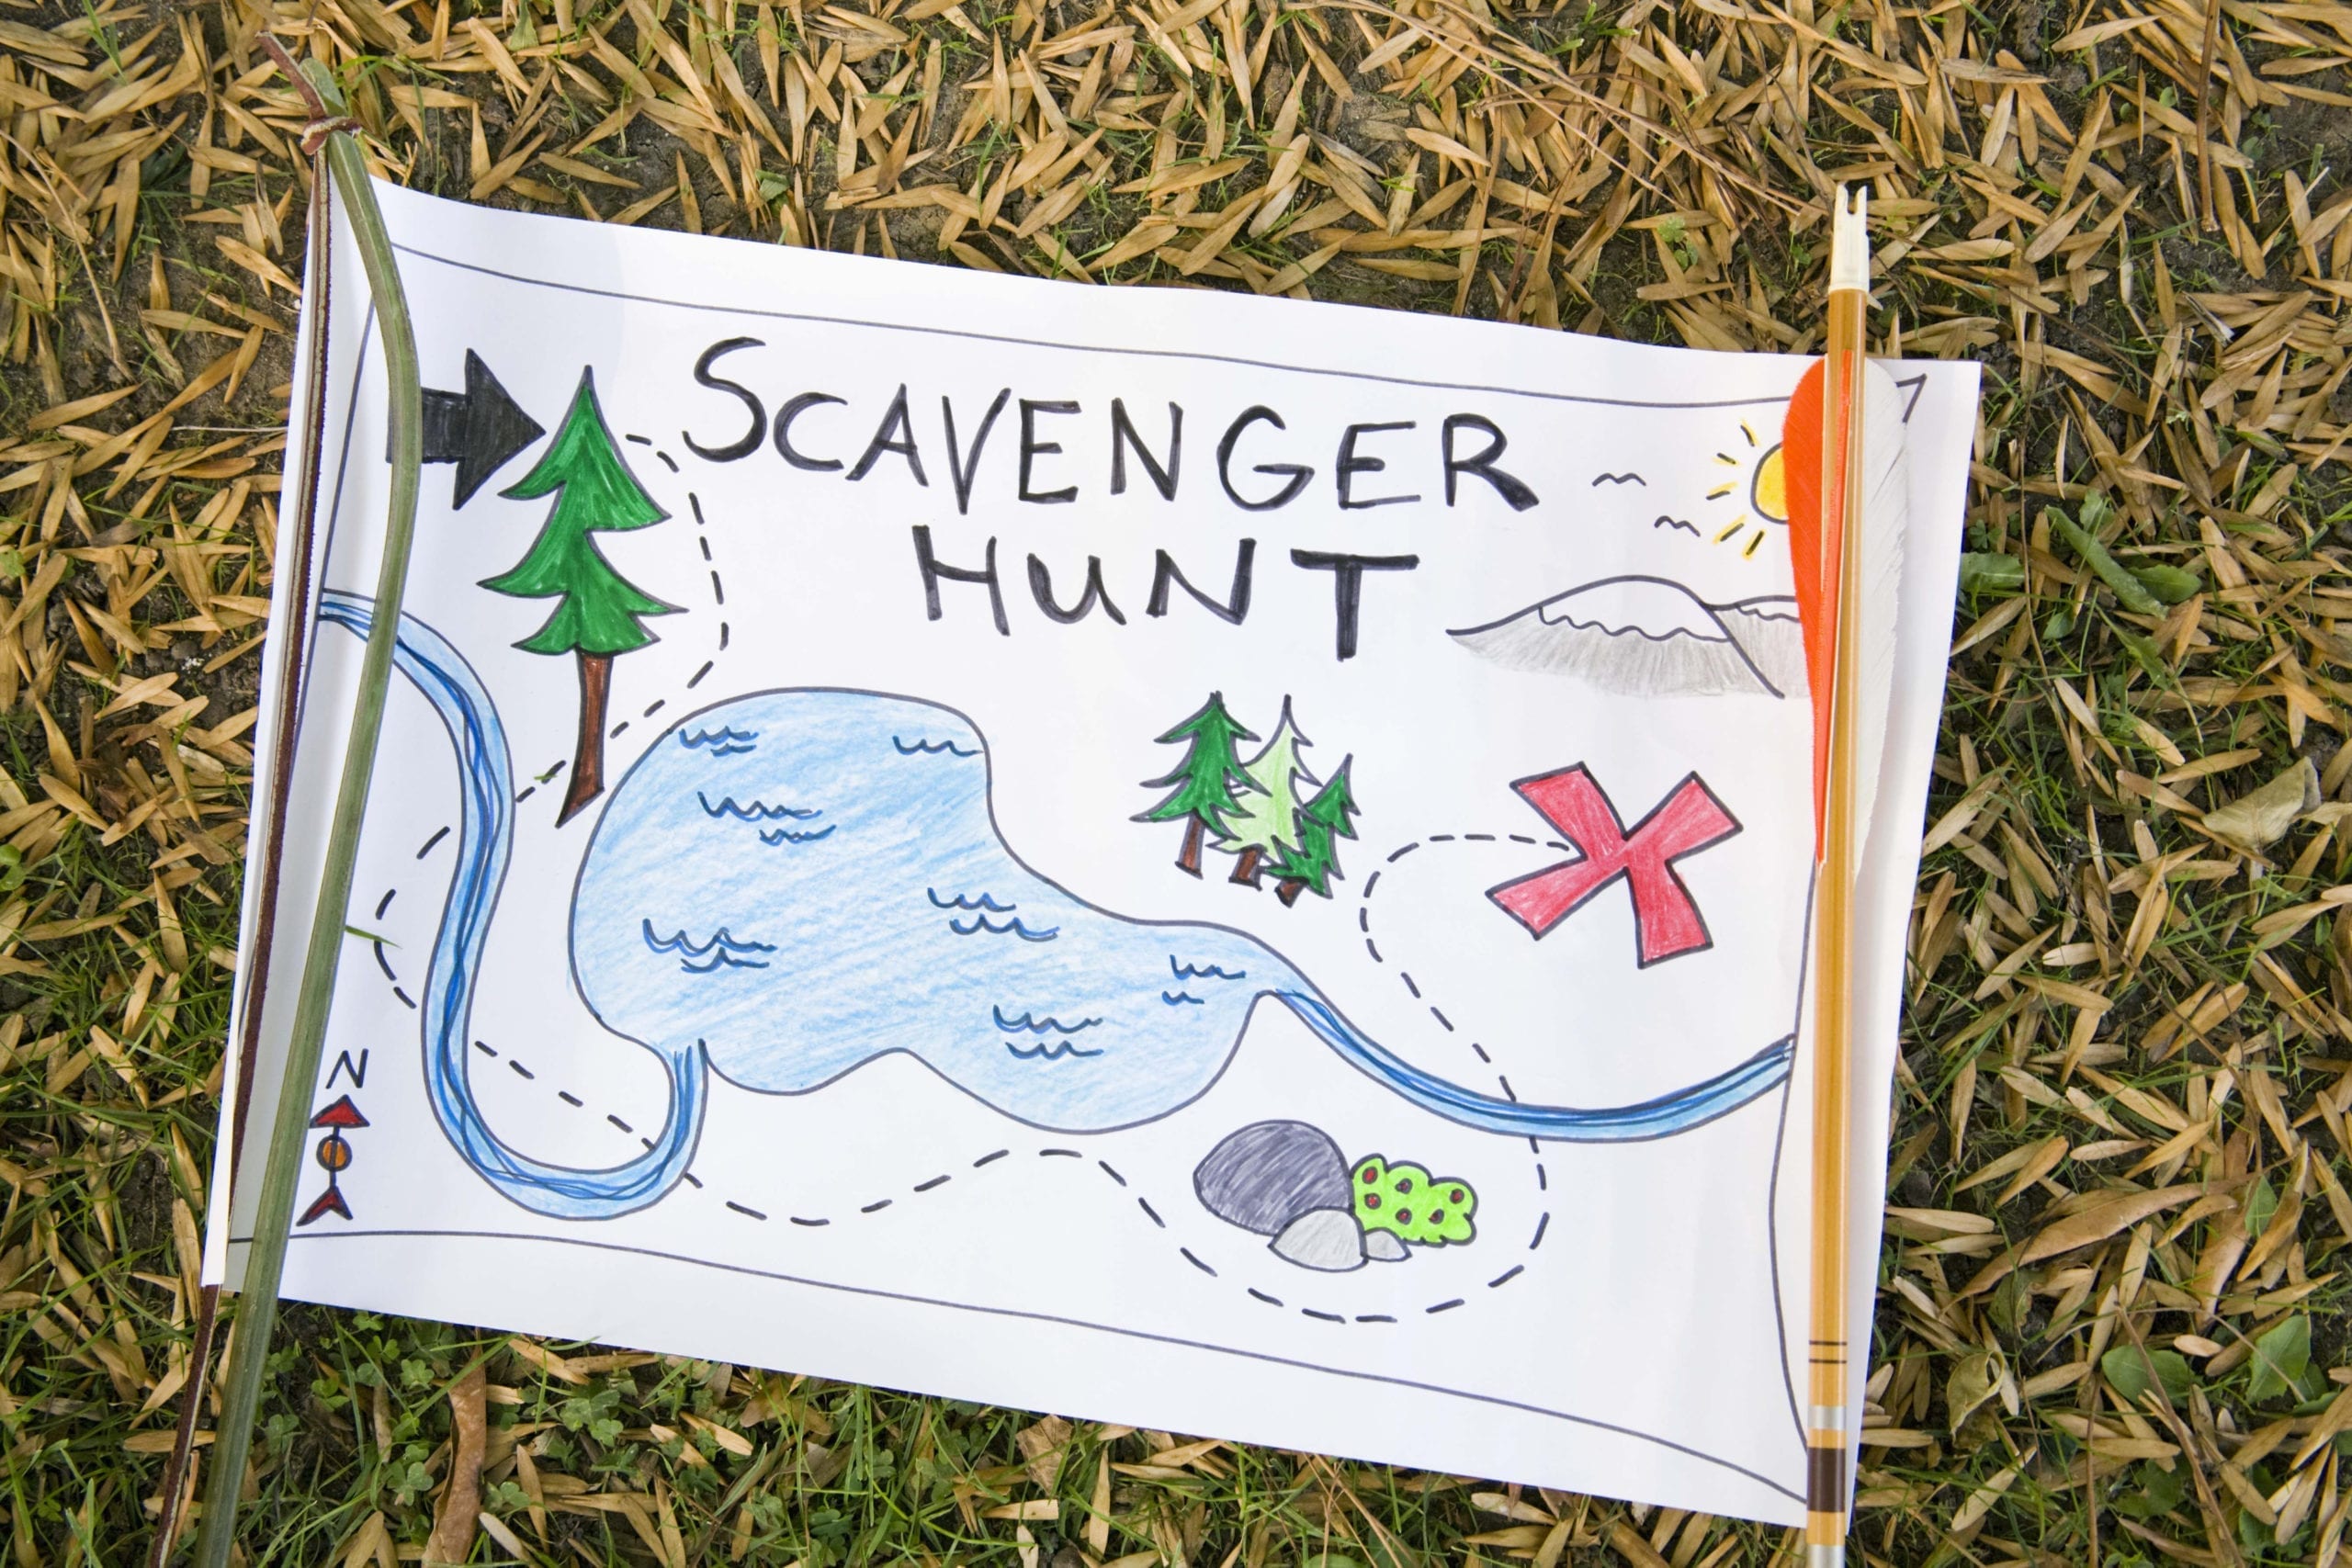 Social media scavenger hunt contest to celebrate 25 years as American Heritage River 